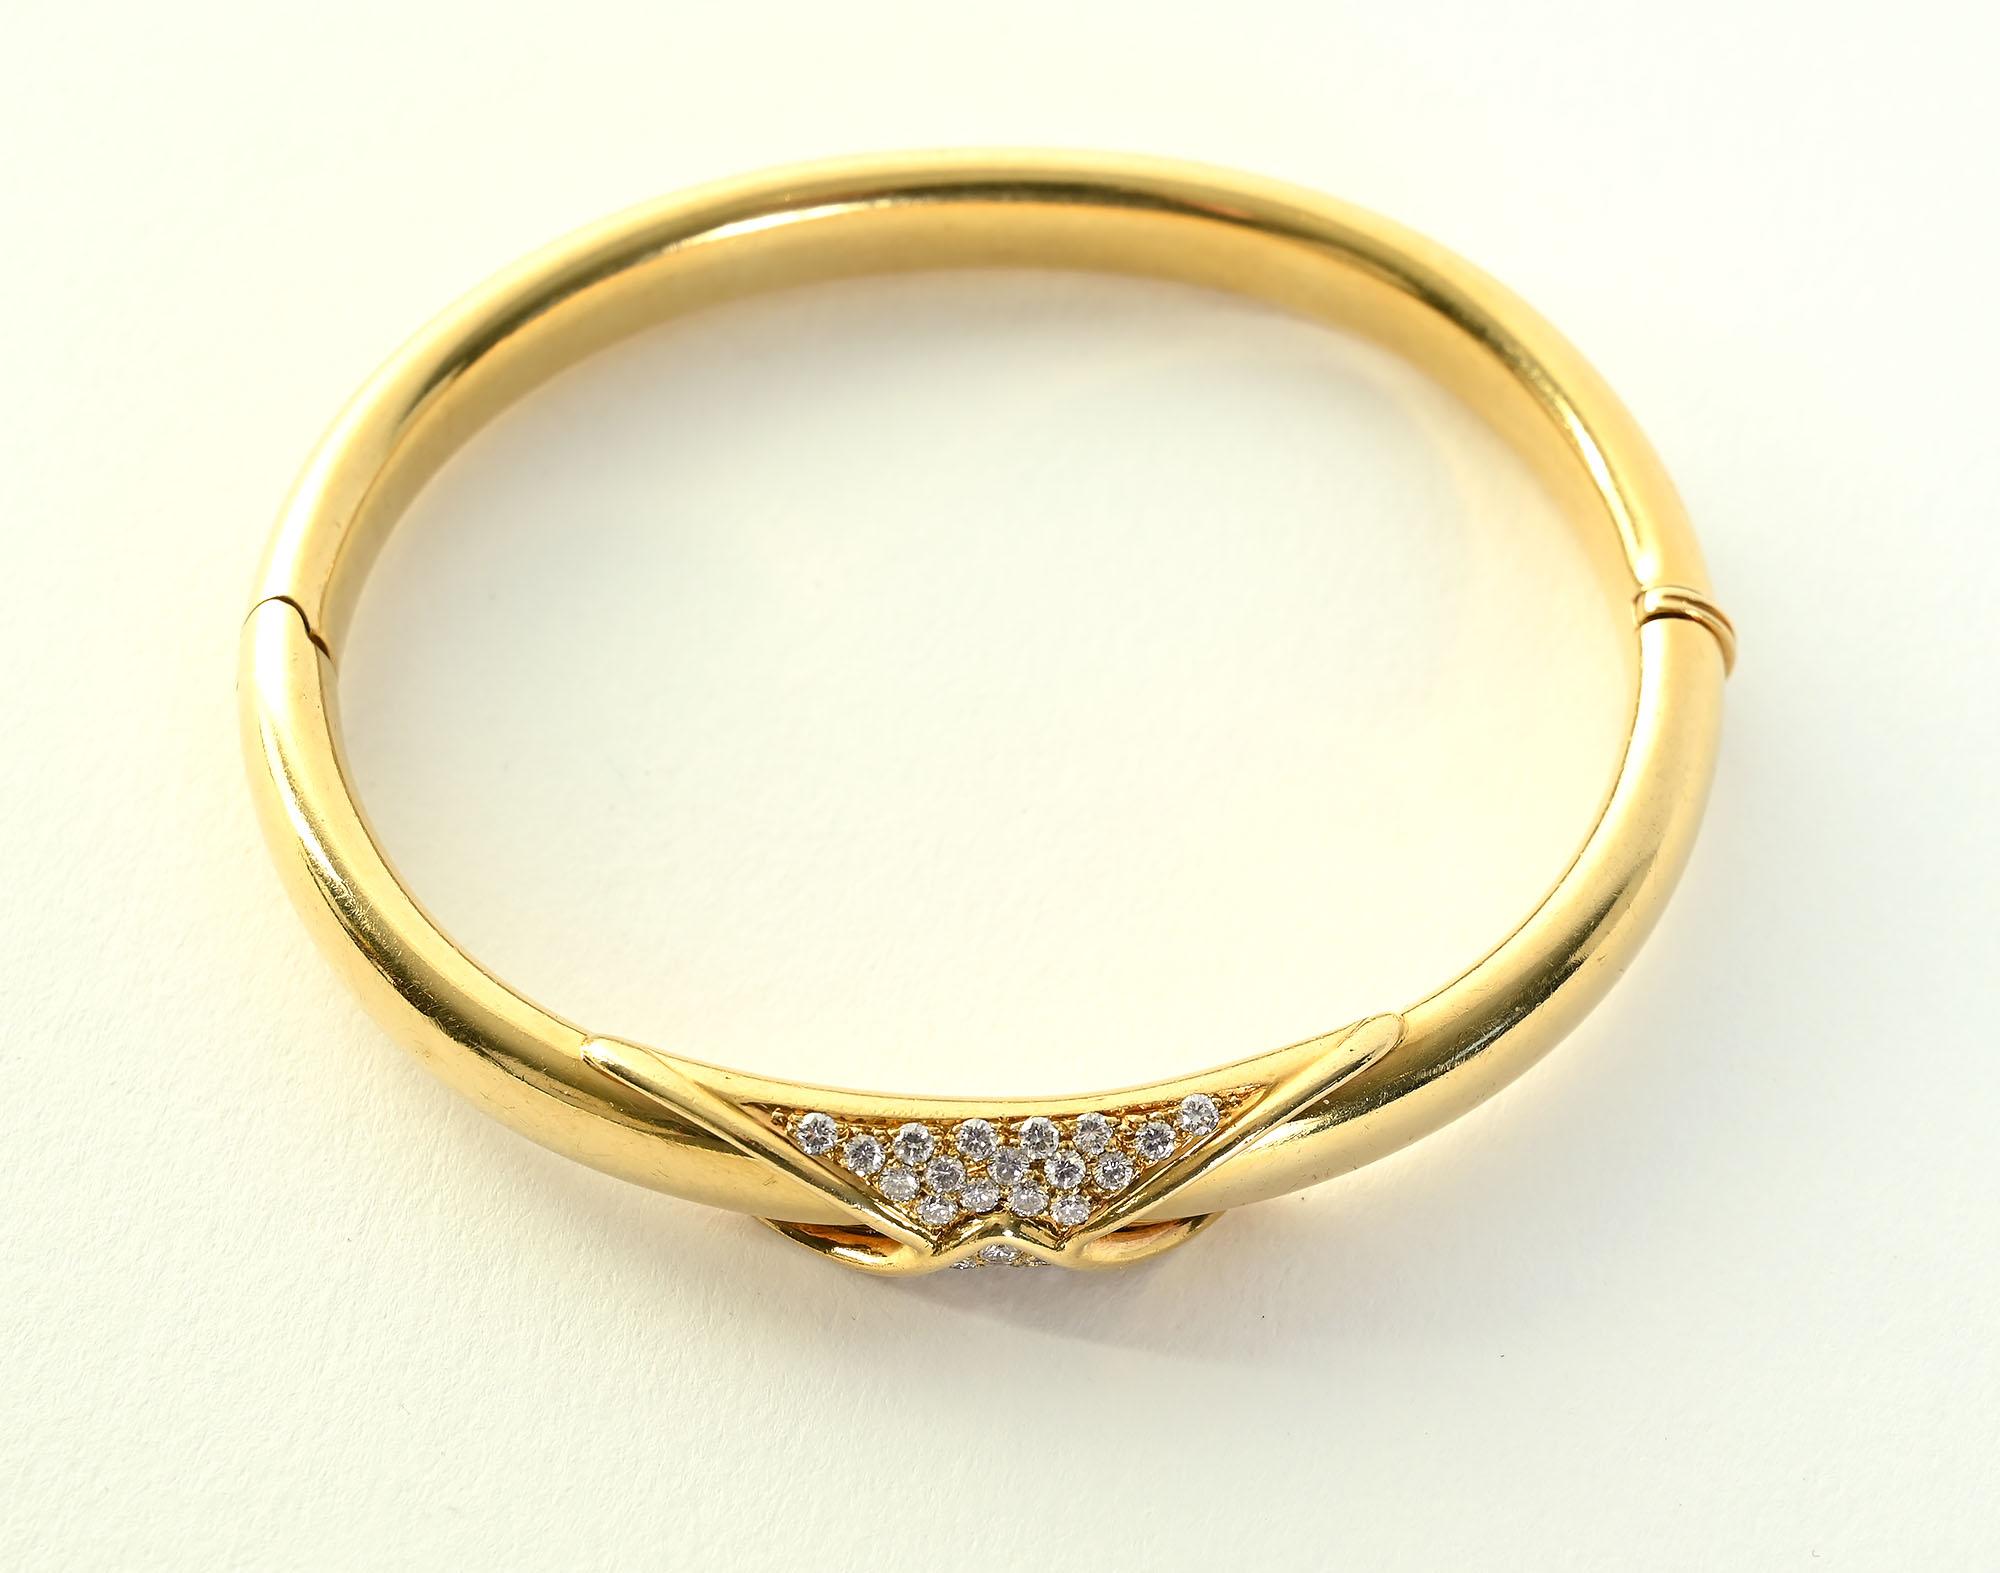 Hinged bangle bracelet of 18 karat gold and diamonds by Birks, the Tiffany of Canada. The bracelet has 32 diamonds weighing approximately .65 carats. They gracefully fold over the center of the oval bracelet. The inner diameter is 2 5/16